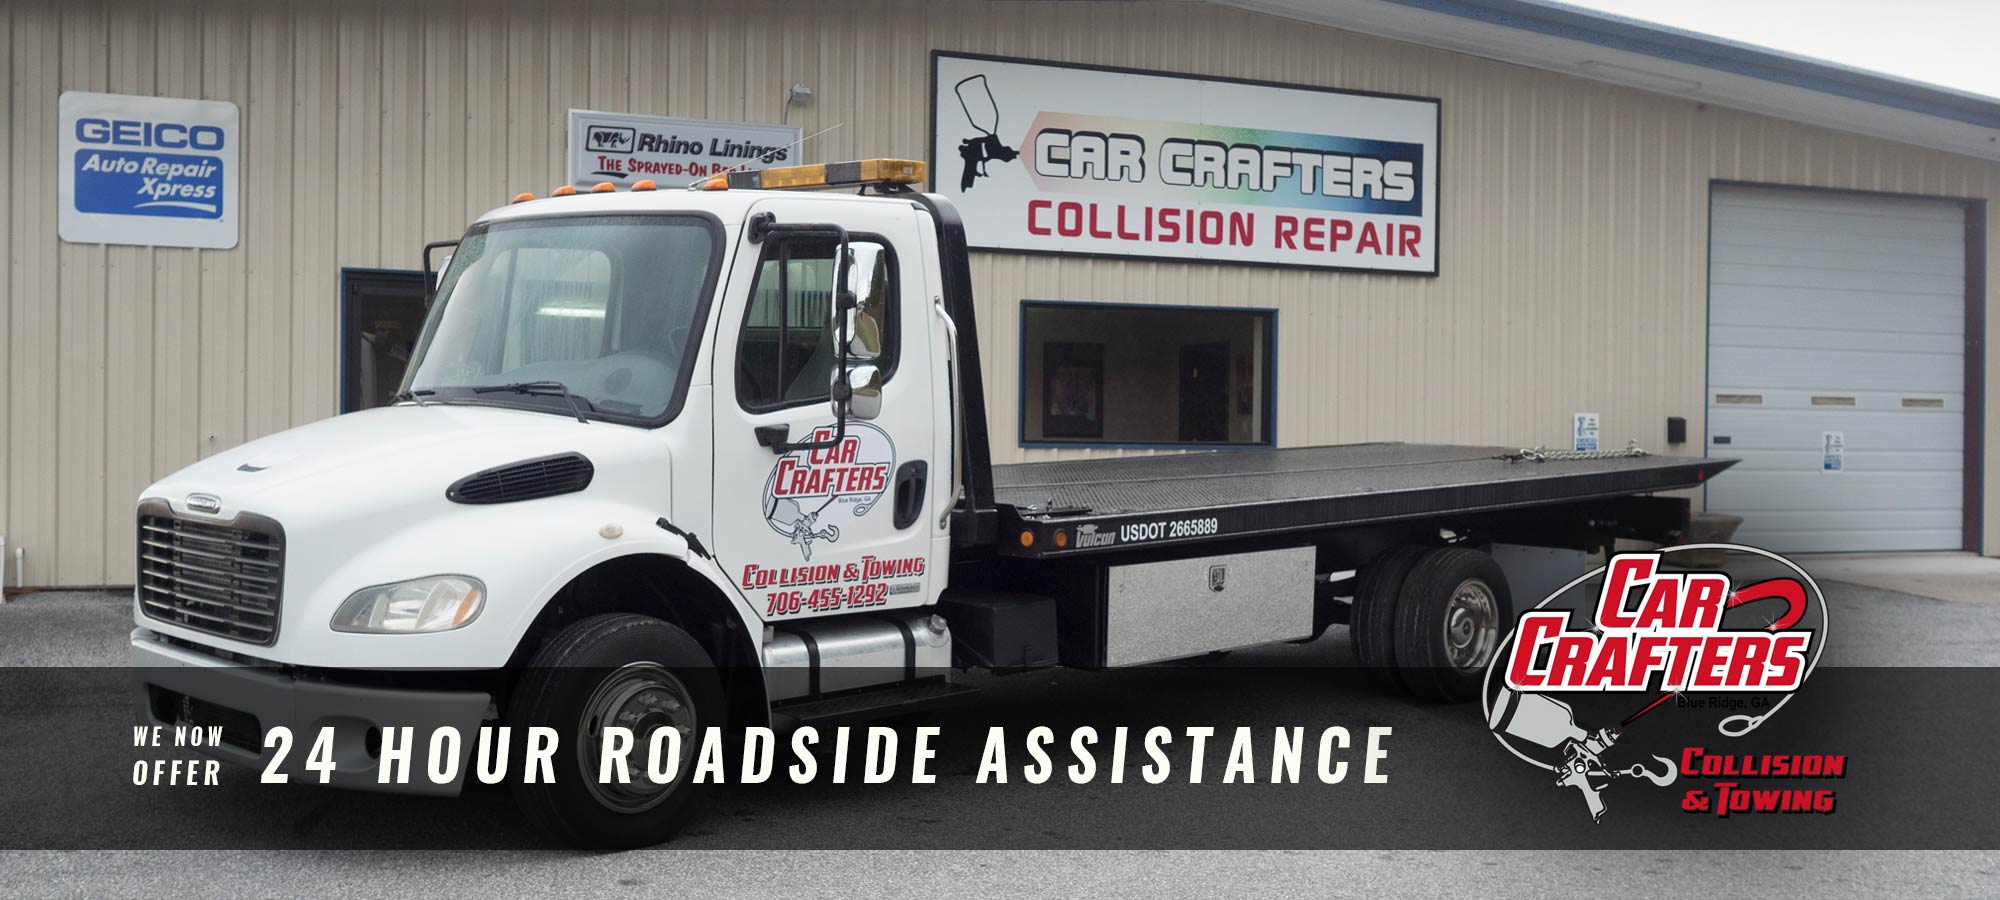 CarCrafters Collision & Towing